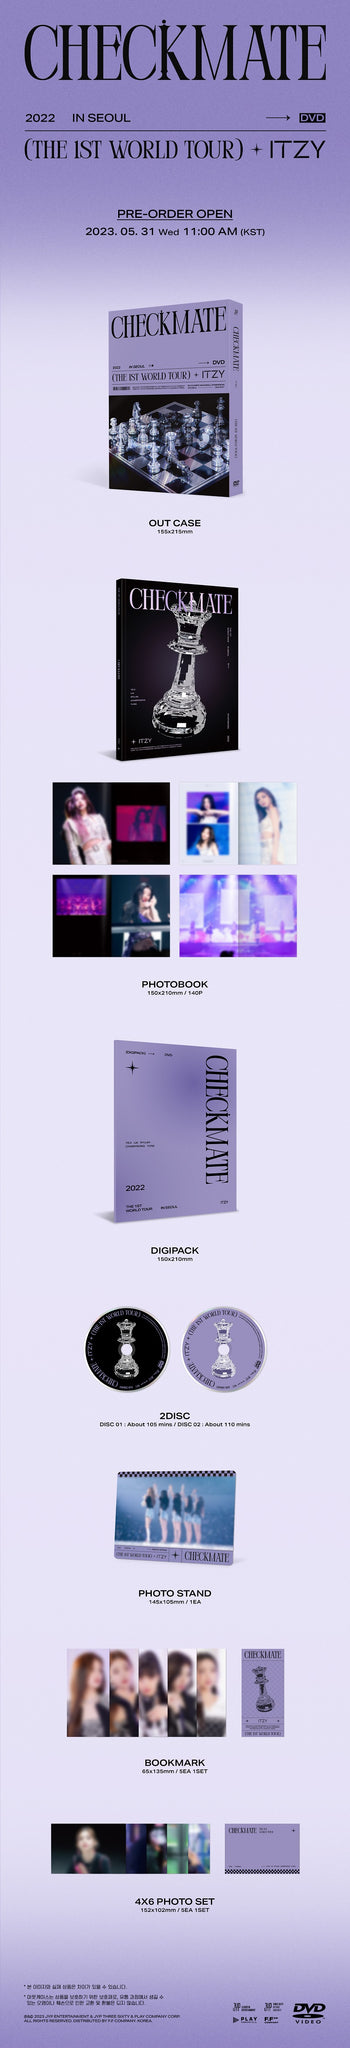 2022 ITZY THE 1ST WORLD TOUR <CHECKMATE> in SEOUL DVD